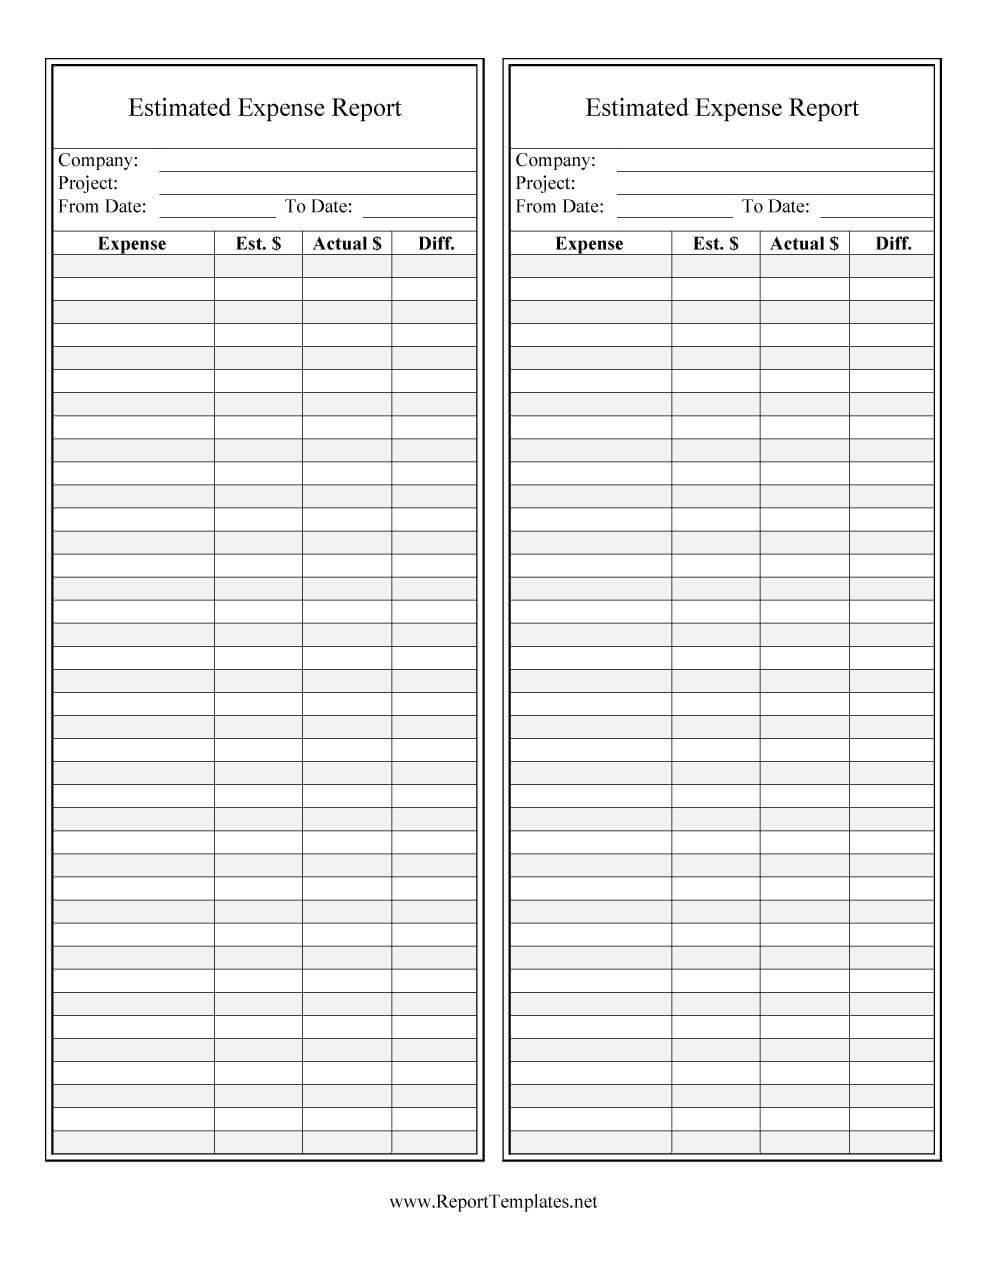 Expenditure Form Template Capital Request Excel Income Claim In Capital Expenditure Report Template